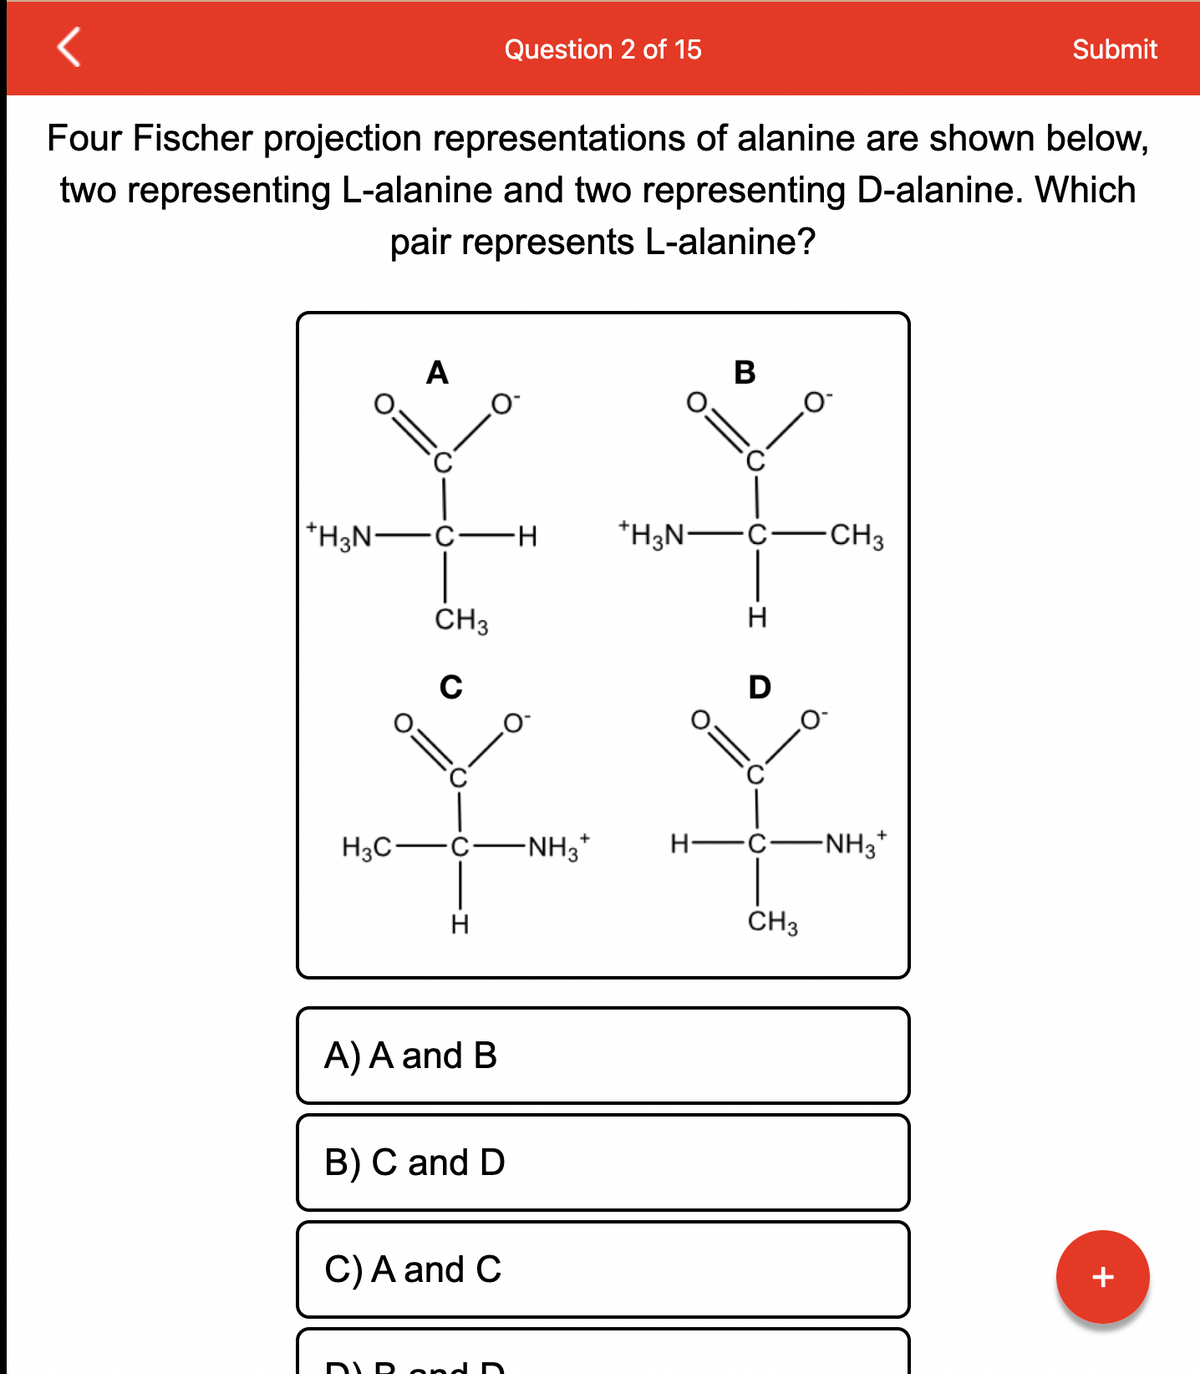 O:
Four Fischer projection representations of alanine are shown below,
two representing L-alanine and two representing D-alanine. Which
pair represents L-alanine?
A
H3C-
+H3N- ·C· -H
CH3
H
A) A and B
B) C and D
Question 2 of 15
C) A and C
D R and D
-NH3*
*H3N-
H-
B
H
CH3
CH3
Submit
-NH3*
+